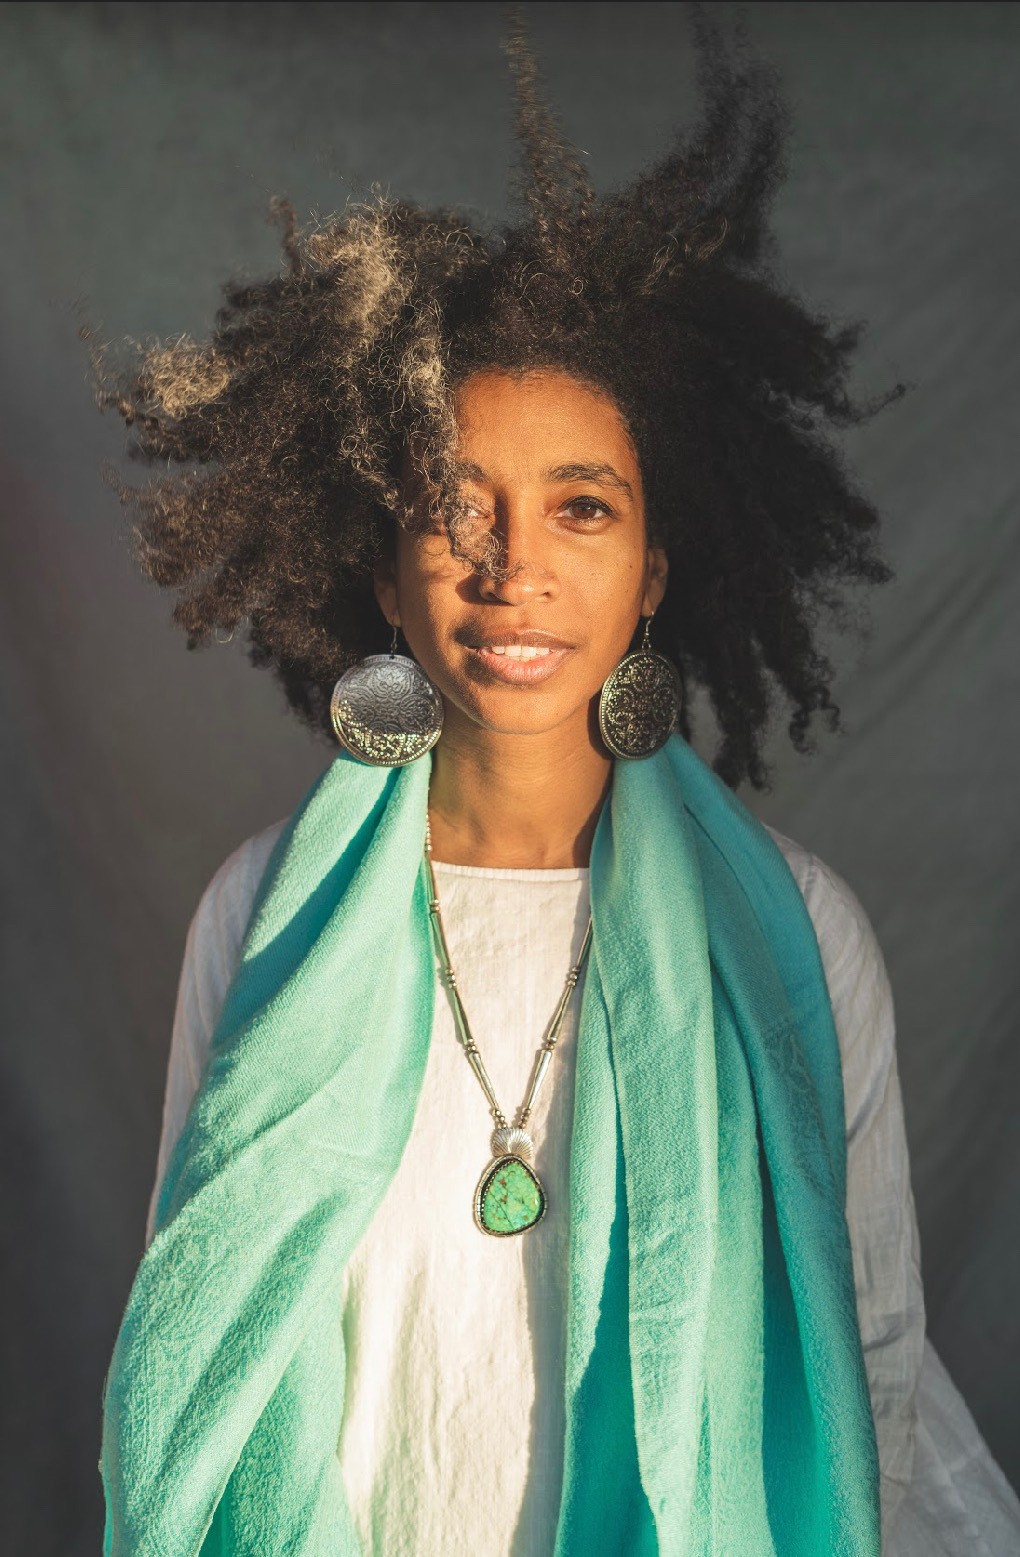 Alexis Pauline Gumbs stands in the sun wearing a white shirt and blue-green scarf, her/their hair lifted by the wind